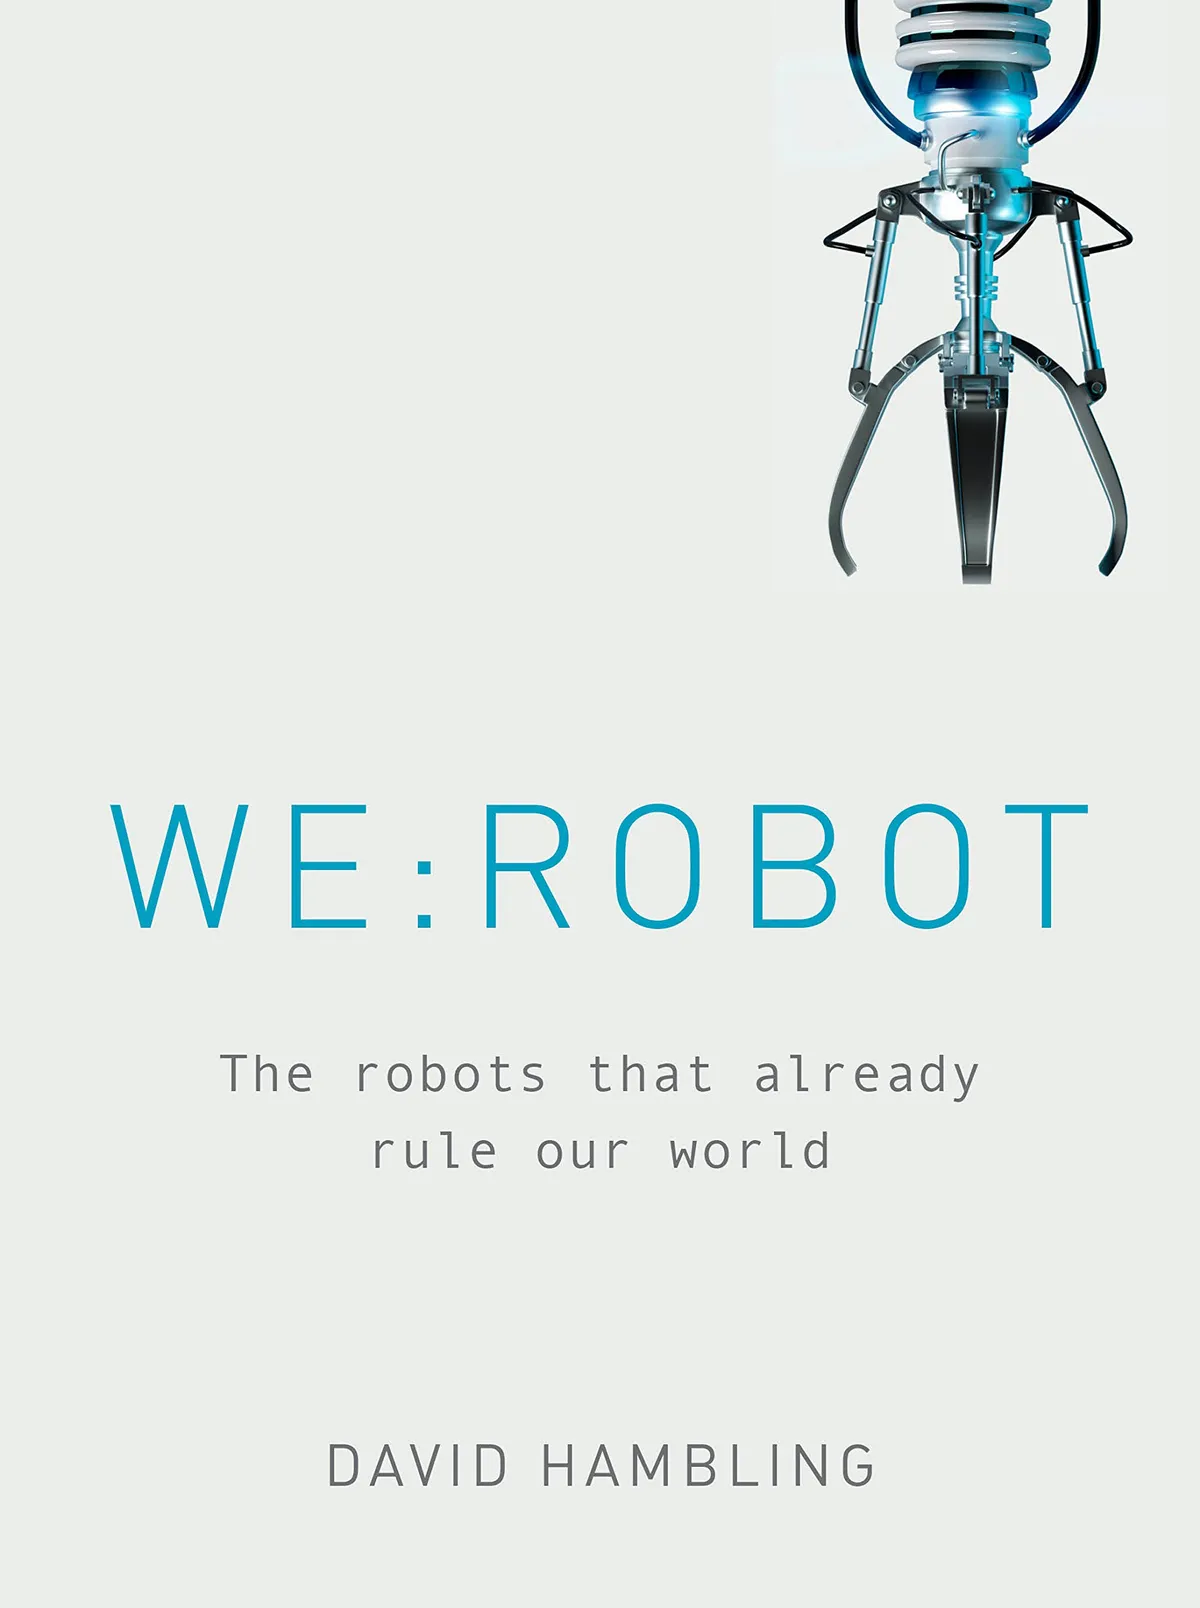 We:Robot: The Robots that Already Rule Our World by David Hambling is out now (£18.99, Aurum Press)